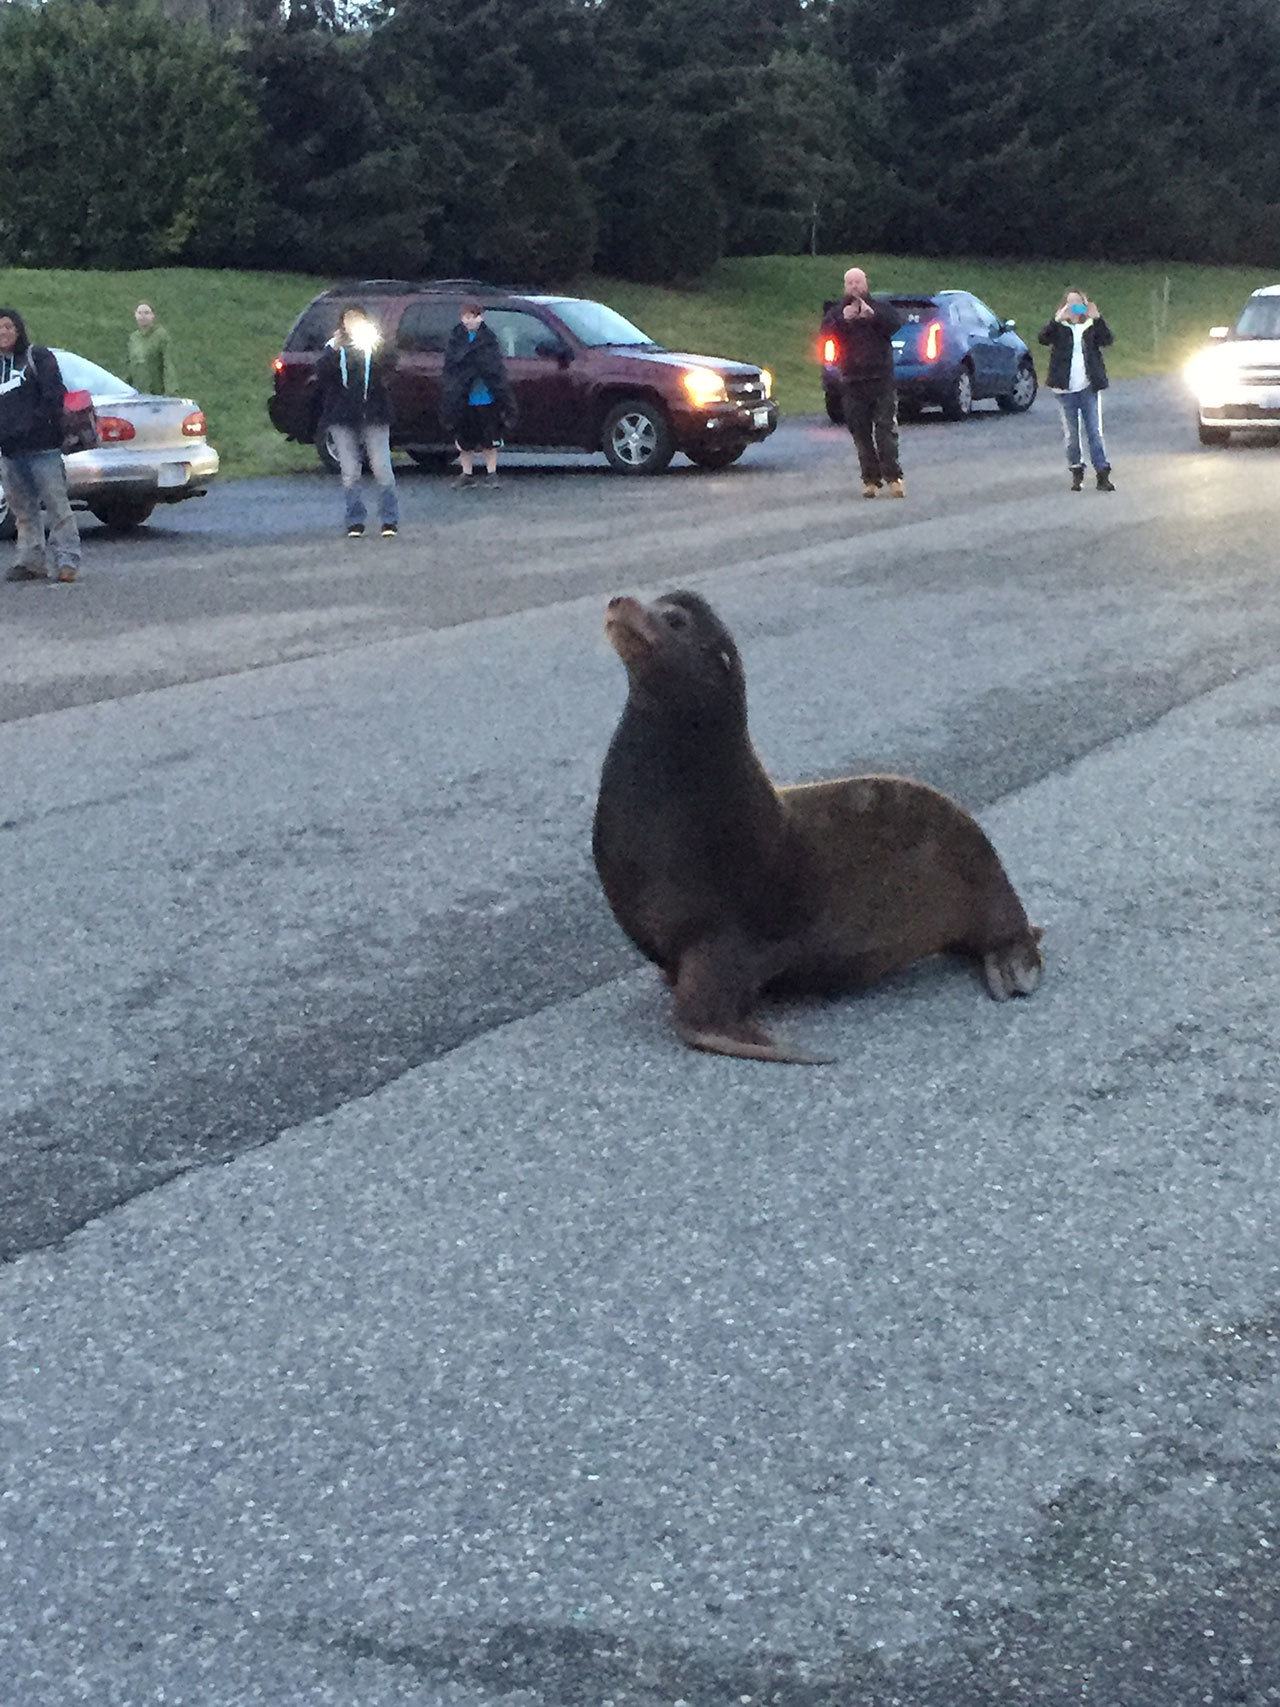 Megan Hansen / Whidbey News Group — A rogue sea lion that visited Nichols Brothers in Freeland on Saturday captured quite a bit of public attention.